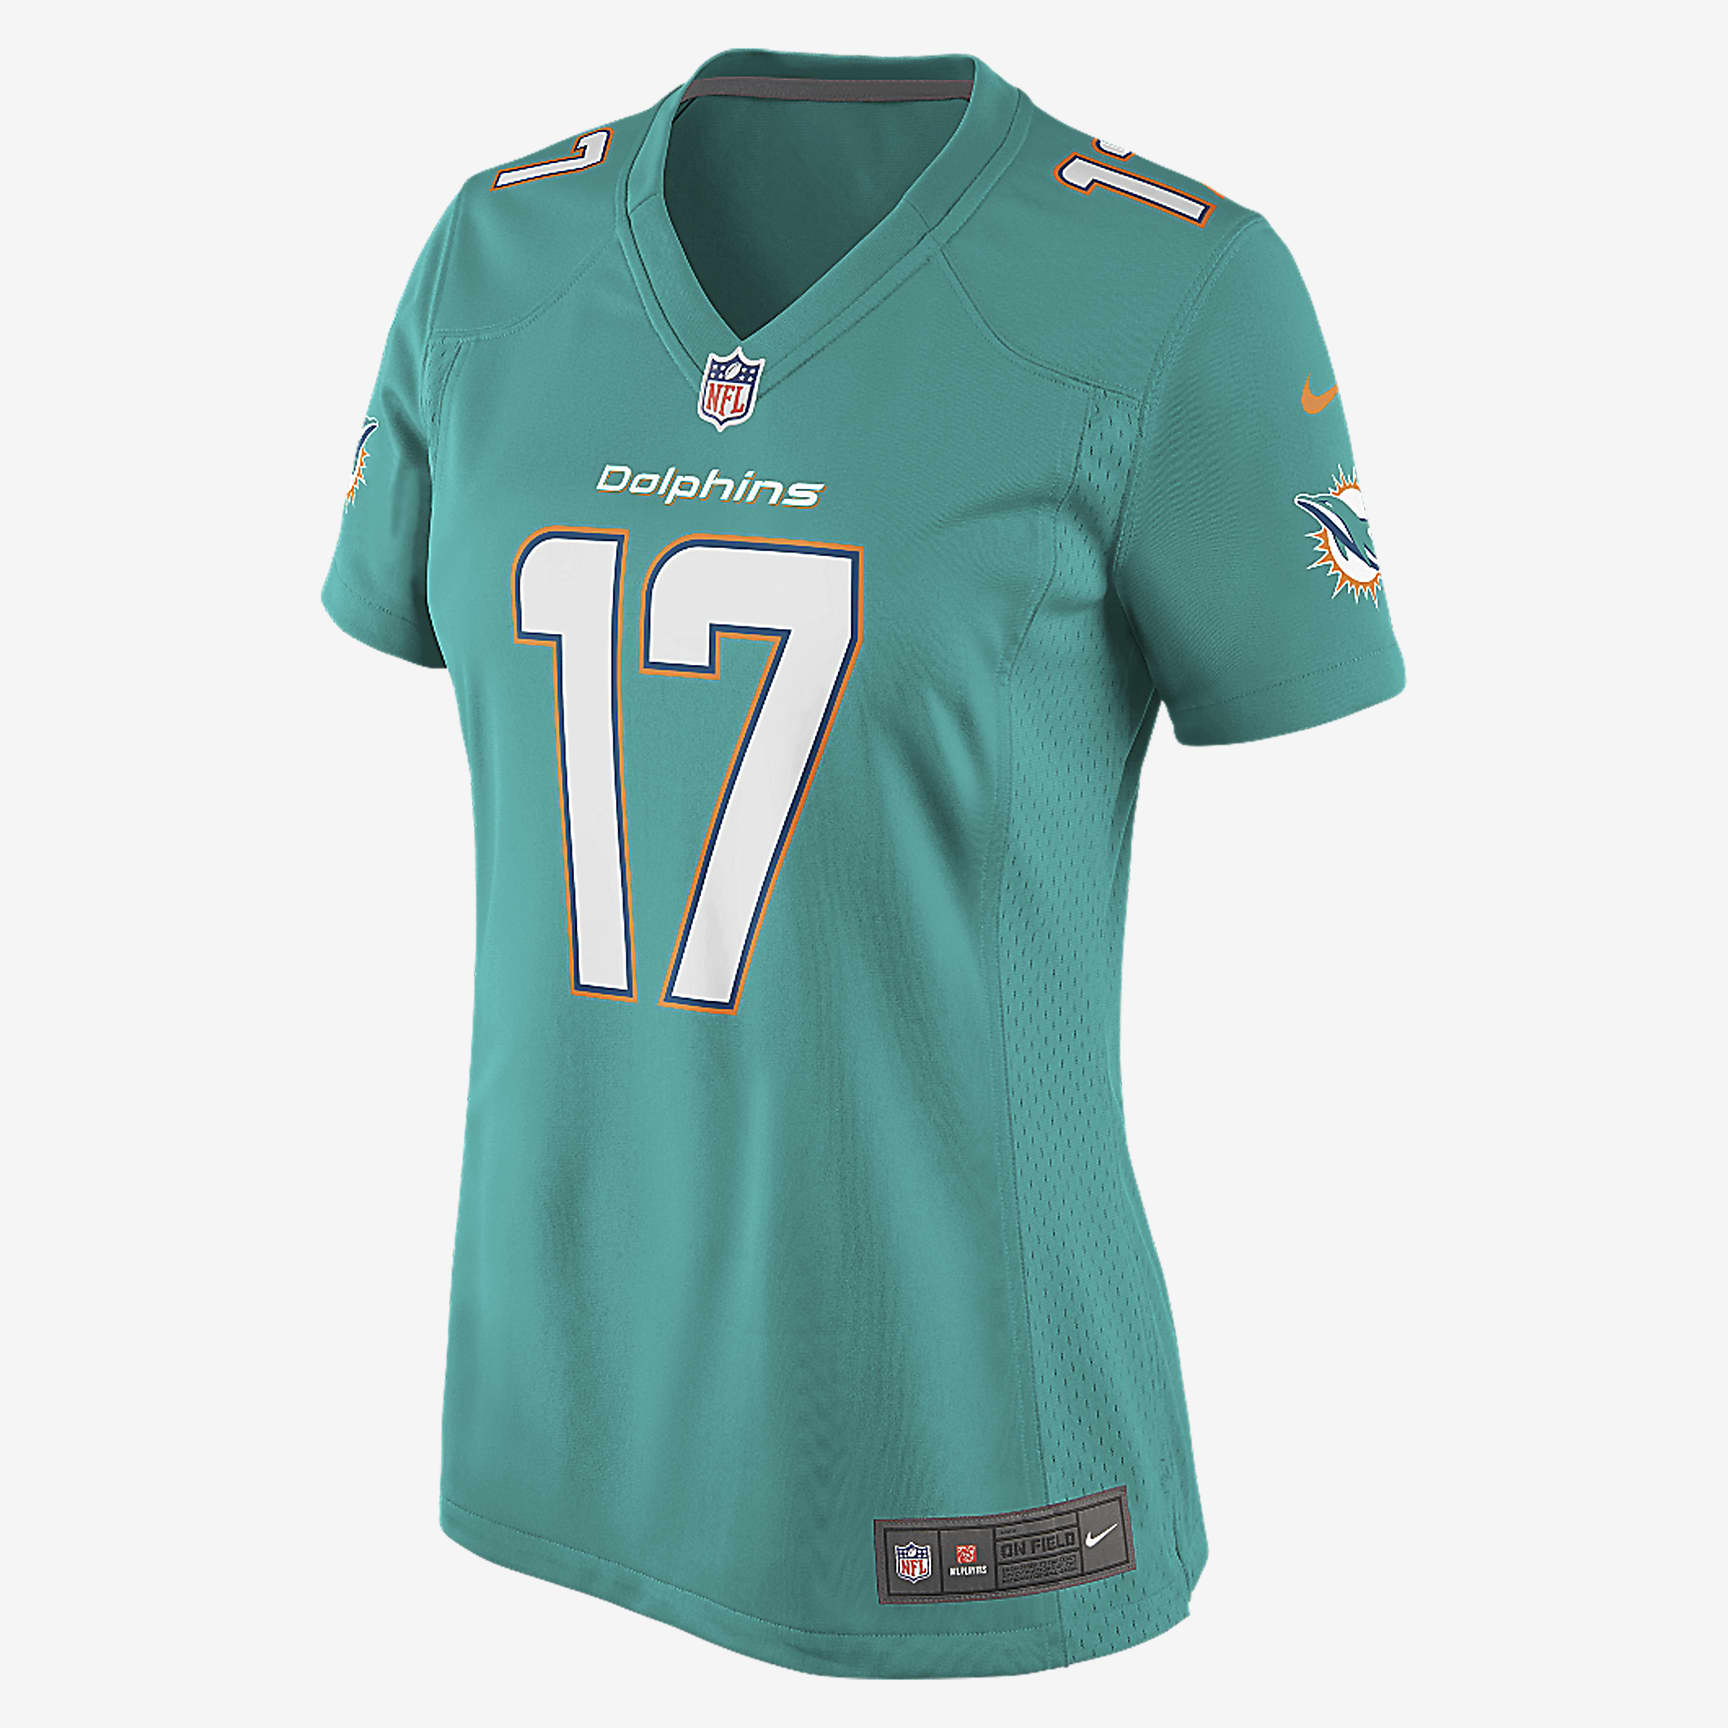 NFL Miami Dolphins (Ryan Tannehill) Women's American Football Home Game